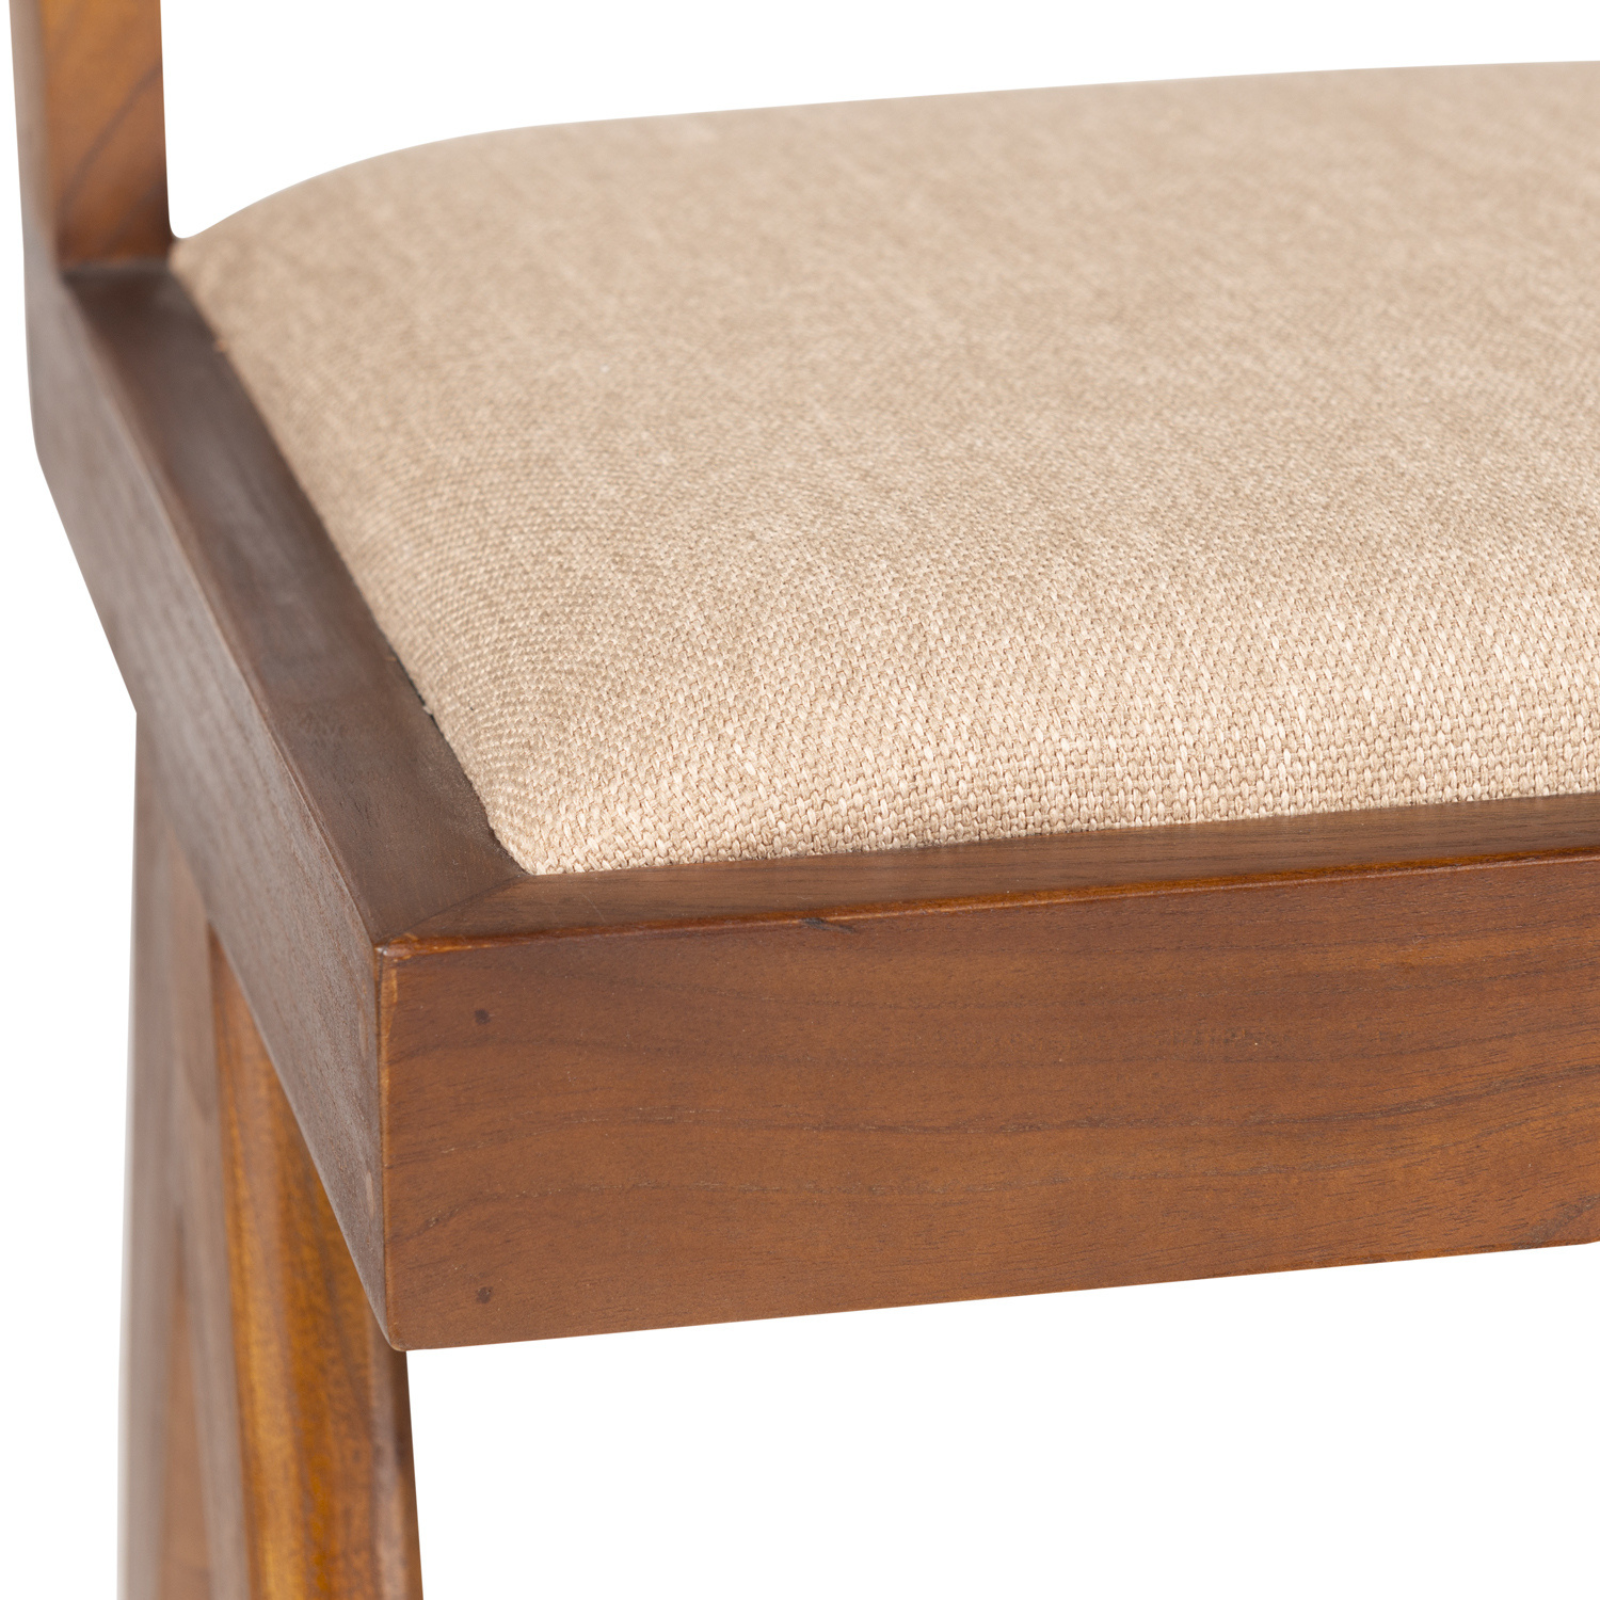 DETJER Dining Chair Upholstered Close Up 